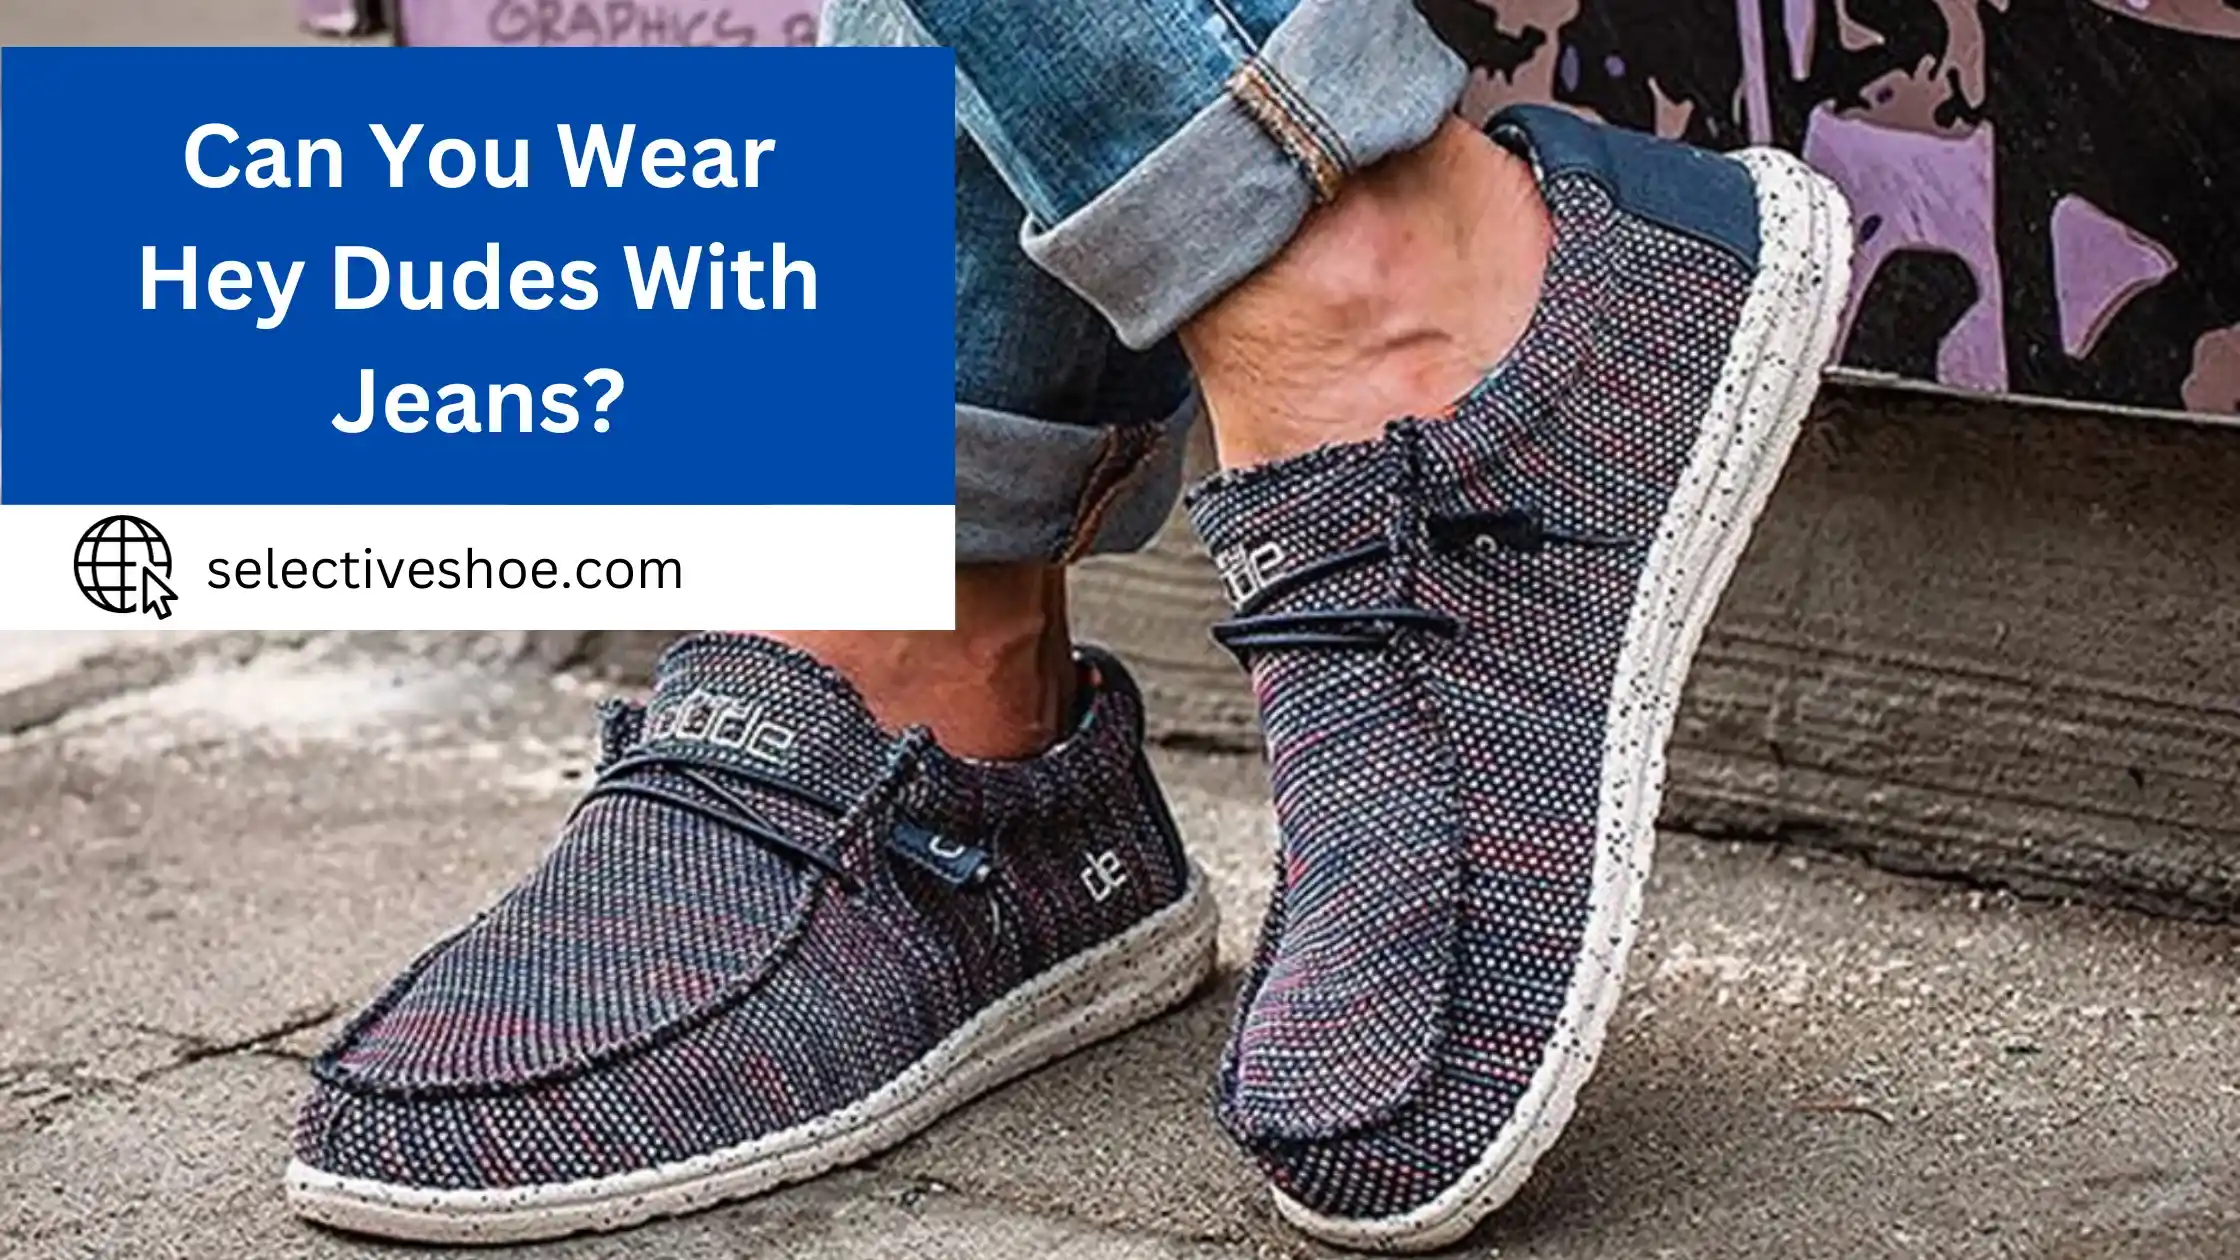 Can You Wear Hey Dudes With Jeans? A Comprehensive Guide